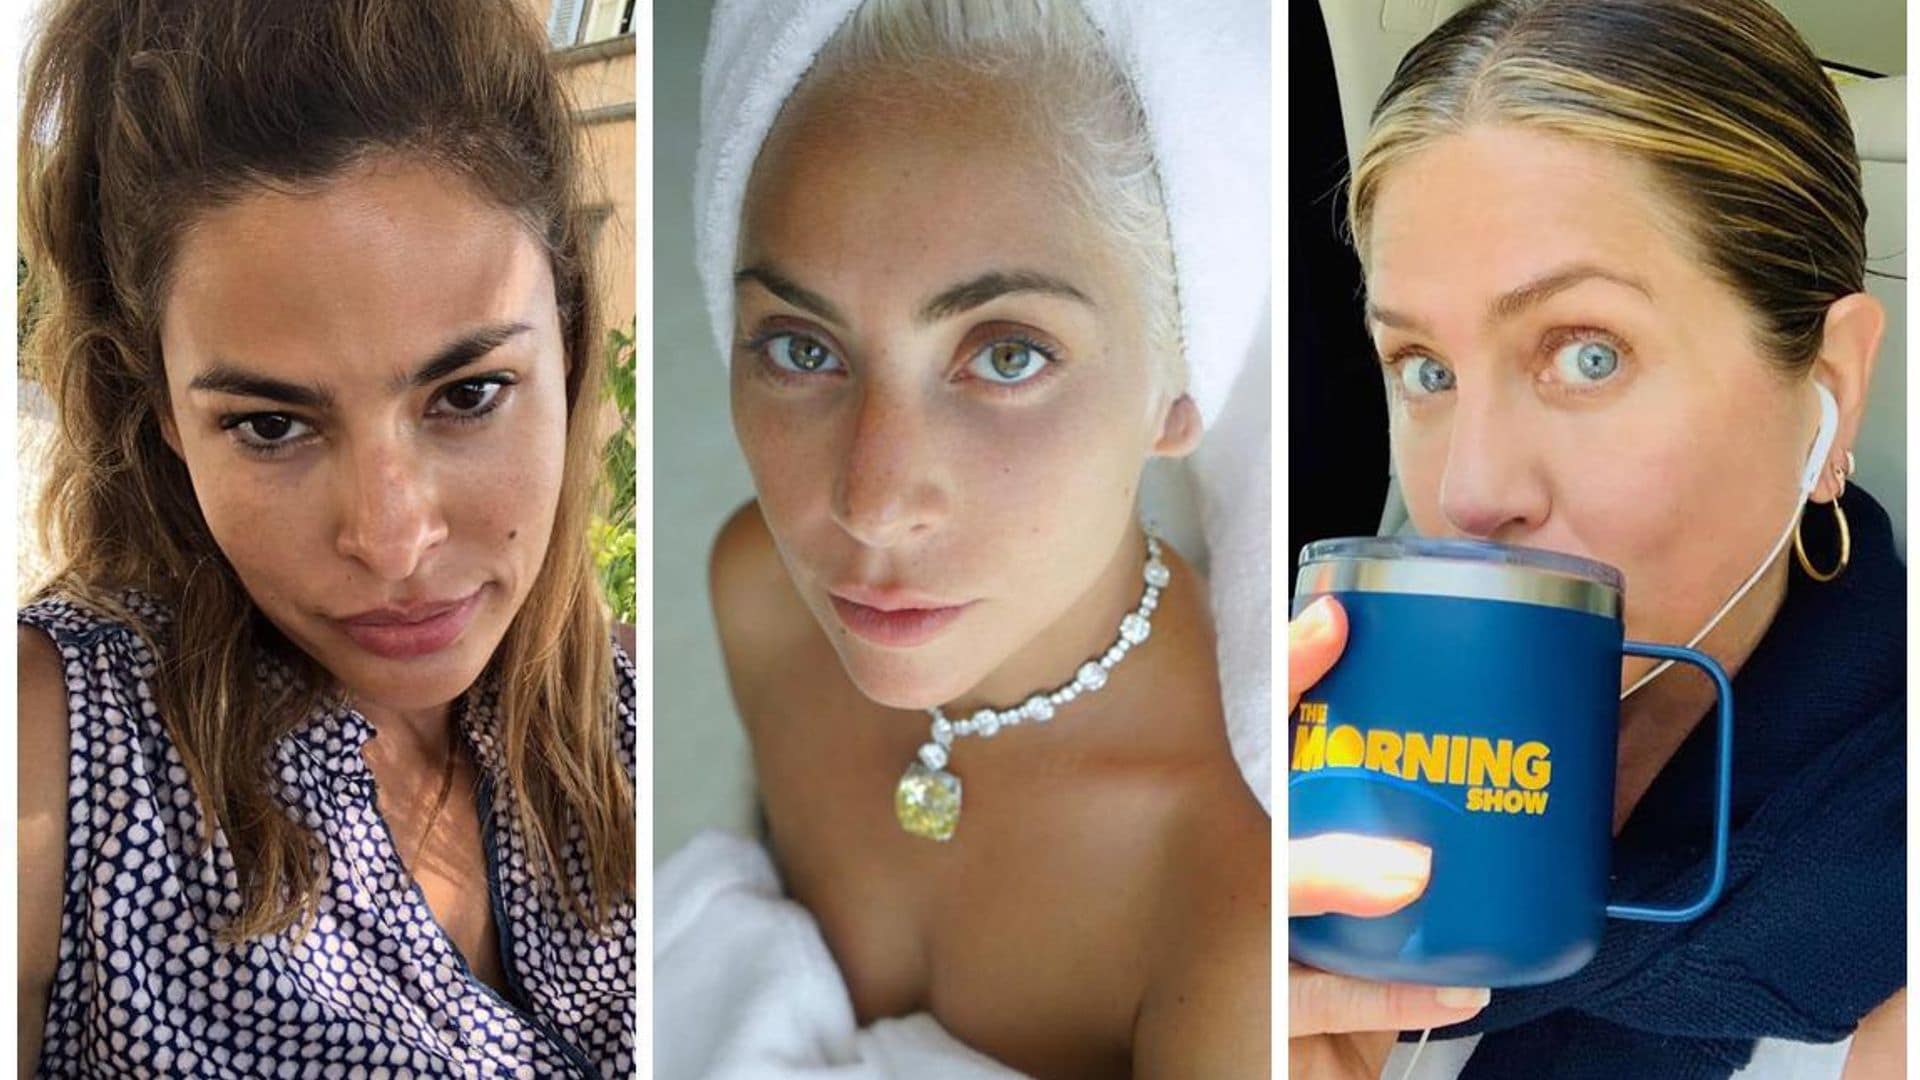 Eva Mendes, Lady Gaga and Jennifer Aniston join the no-makeup trend